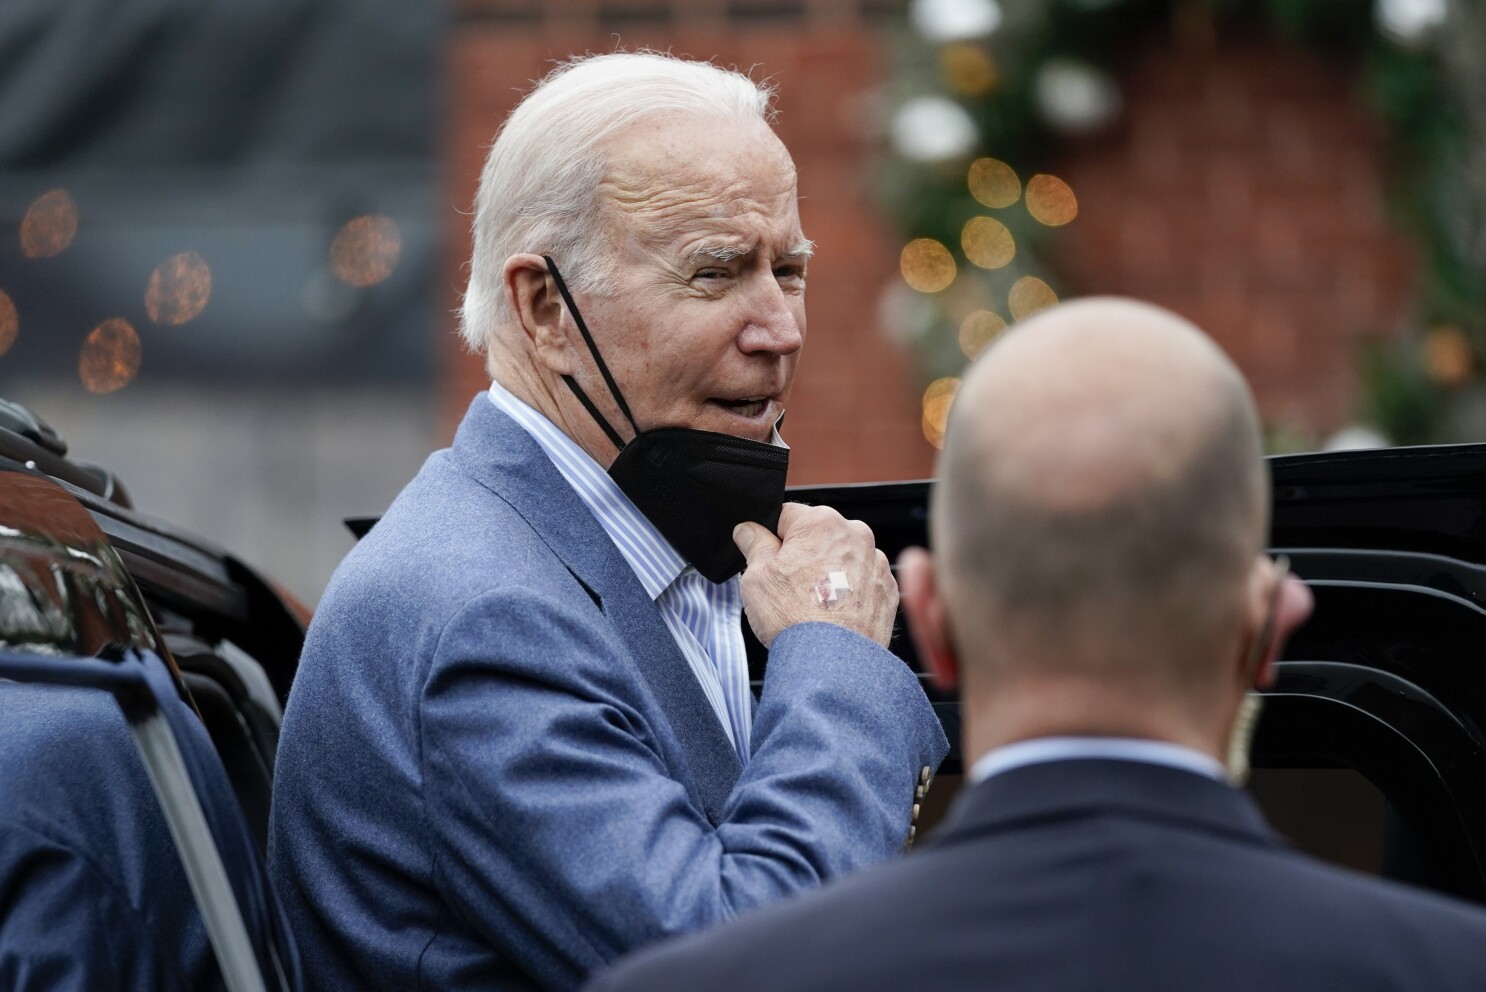 If Russia invades Ukraine, Biden promises that the US will act swiftly